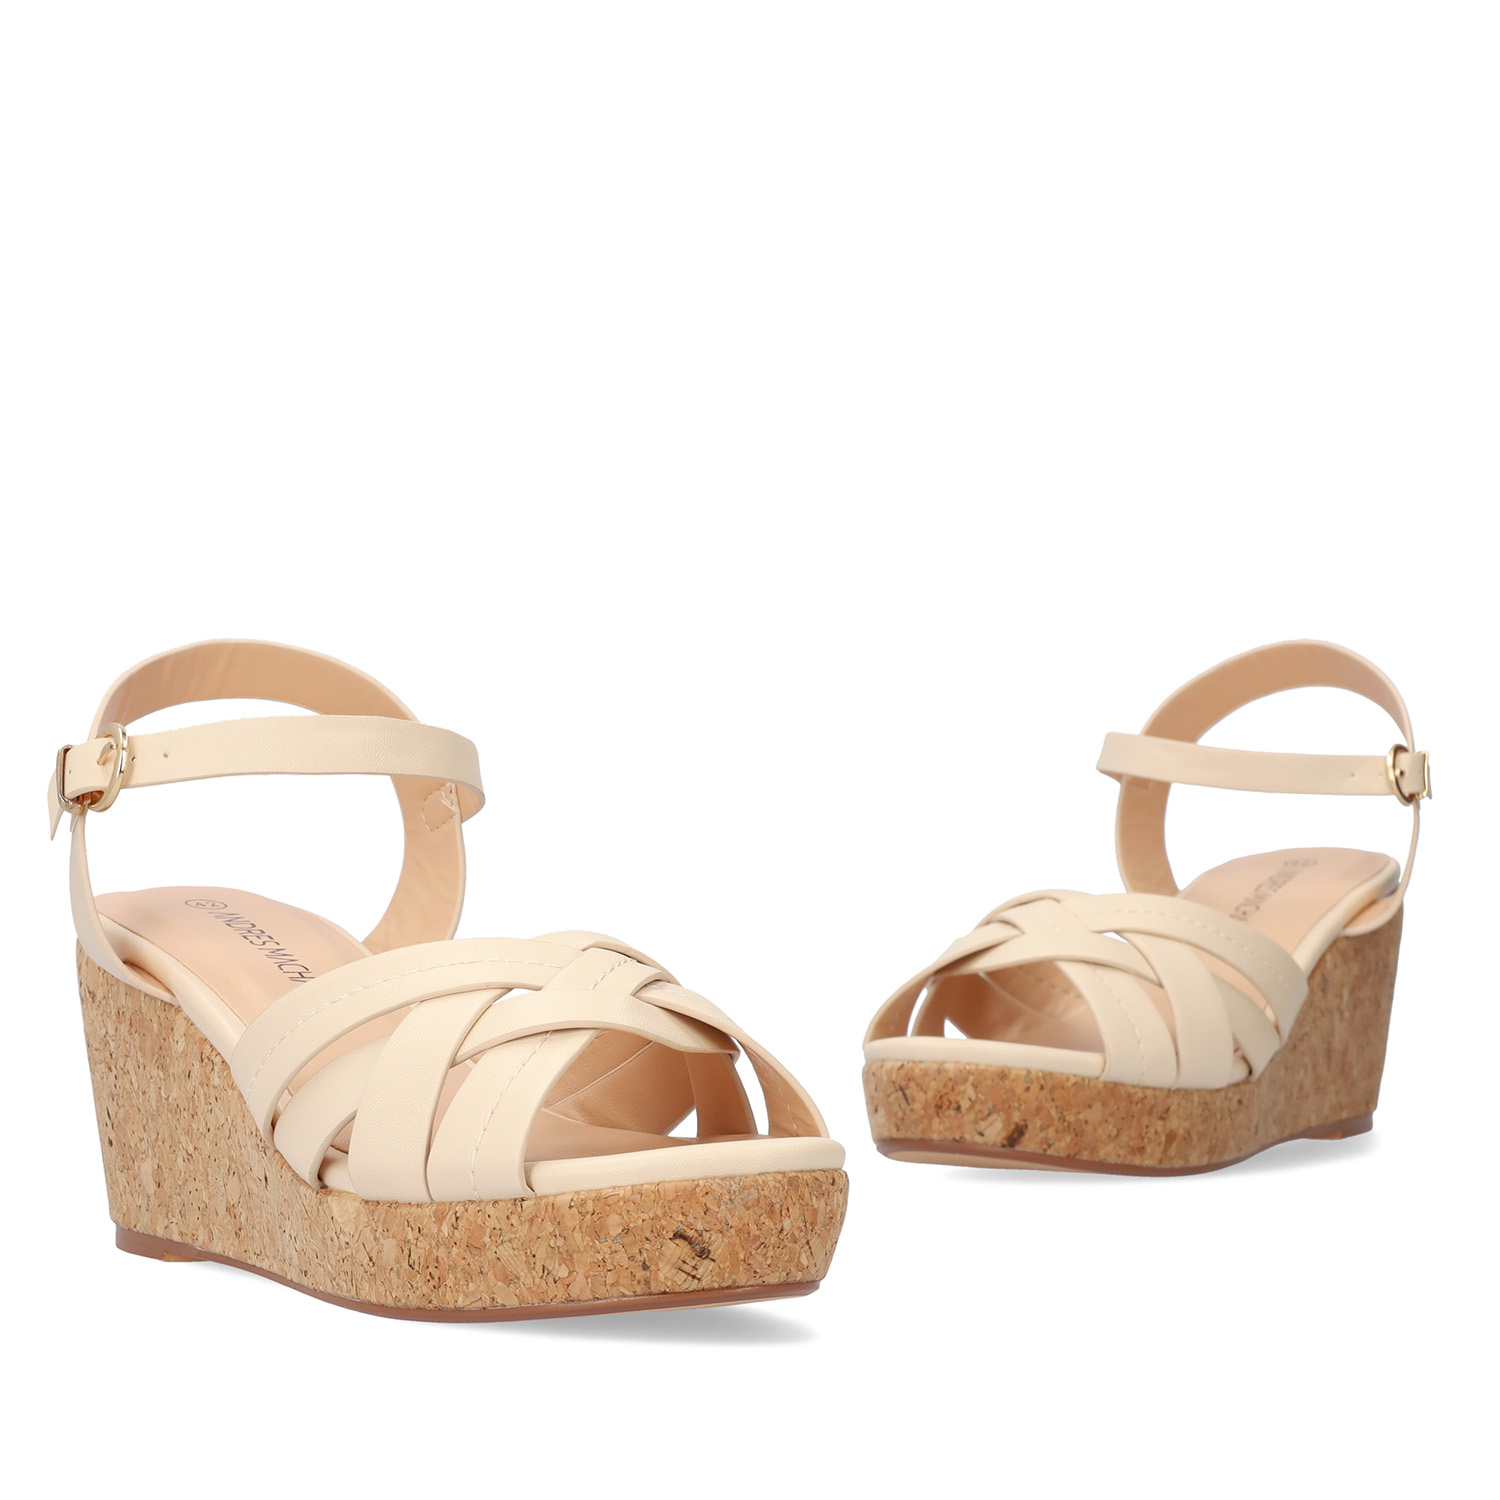 Beige soft sandals with a wooden effect wedge 